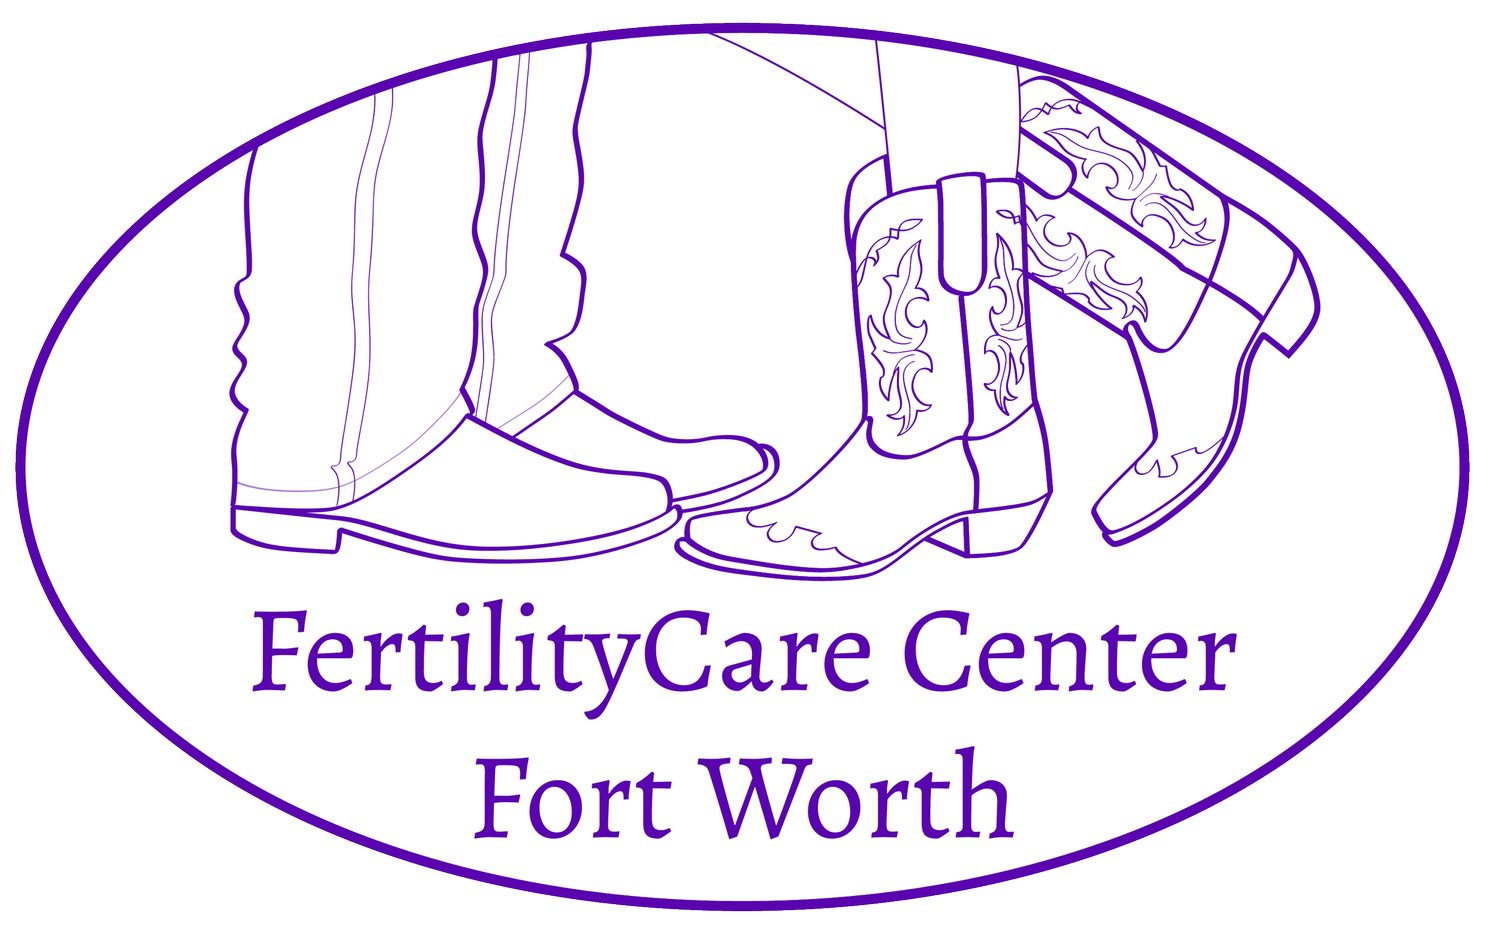 FertilityCare Center of Fort Worth